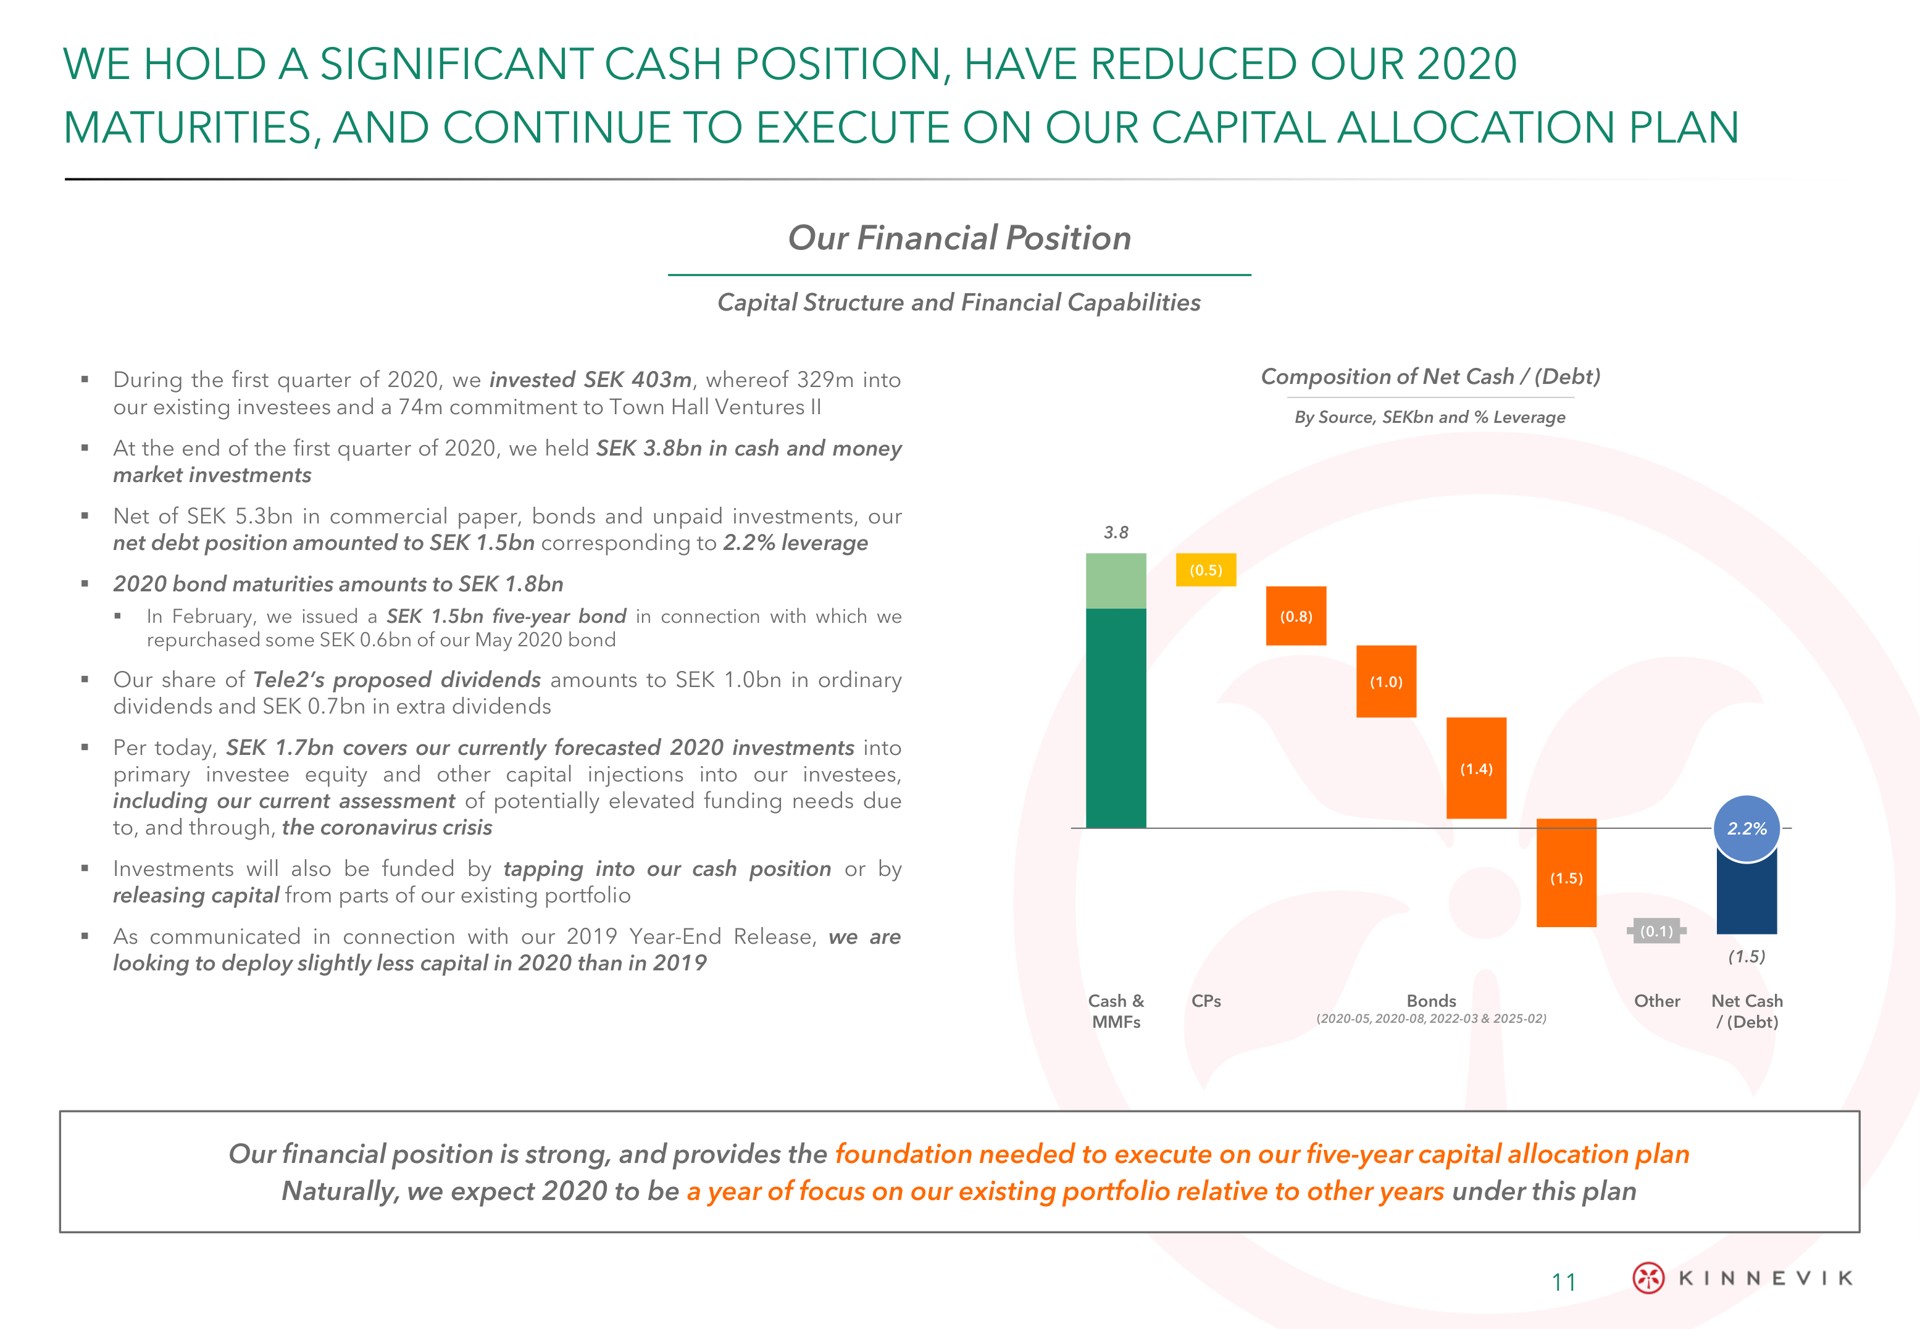 we hold a significant cash position have reduced our maturities and continue to execute on our capital allocation plan | Kinnevik